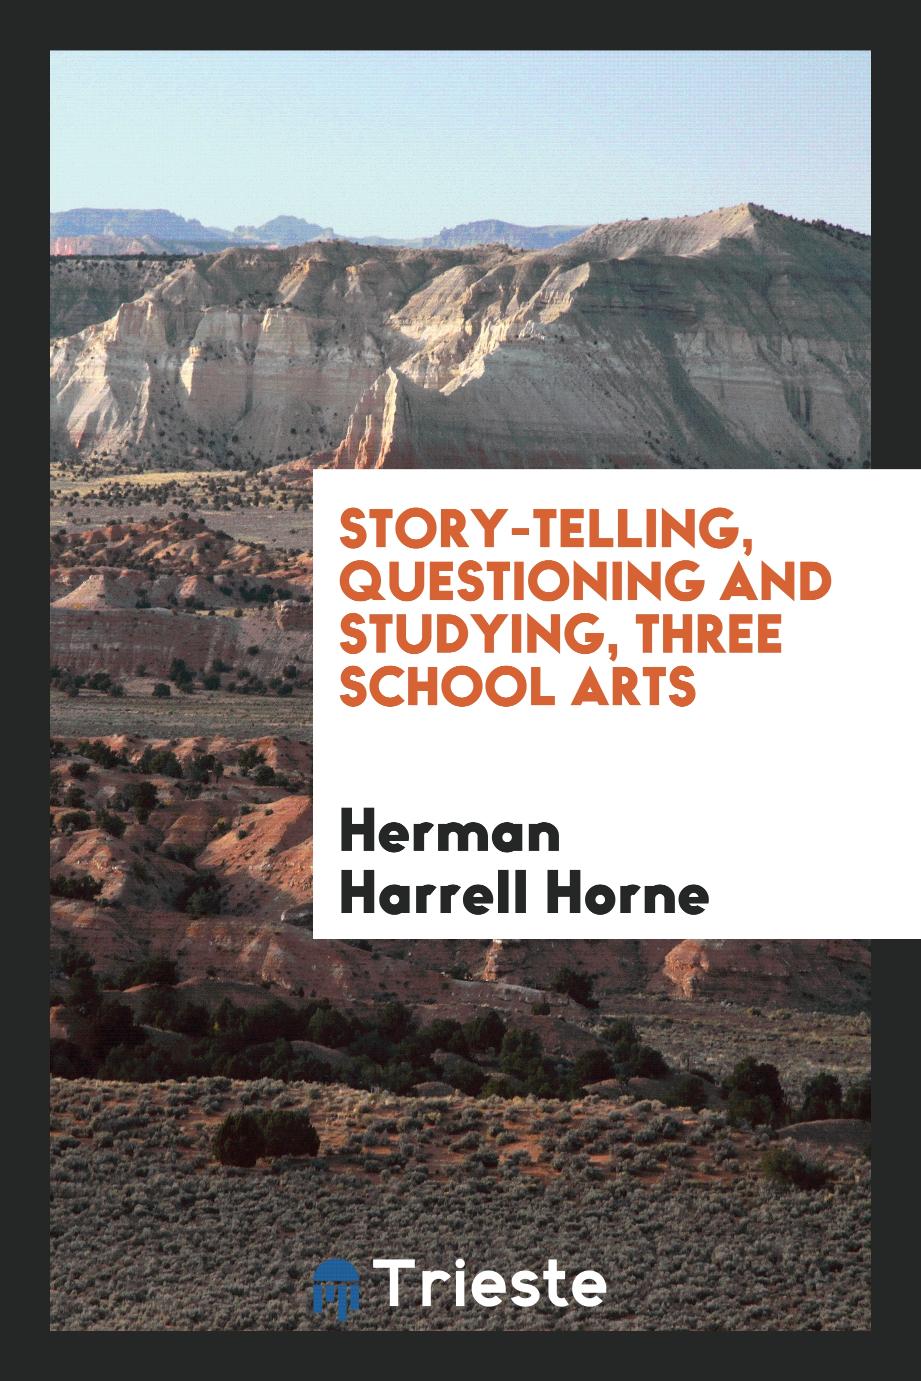 Story-telling, questioning and studying, three school arts